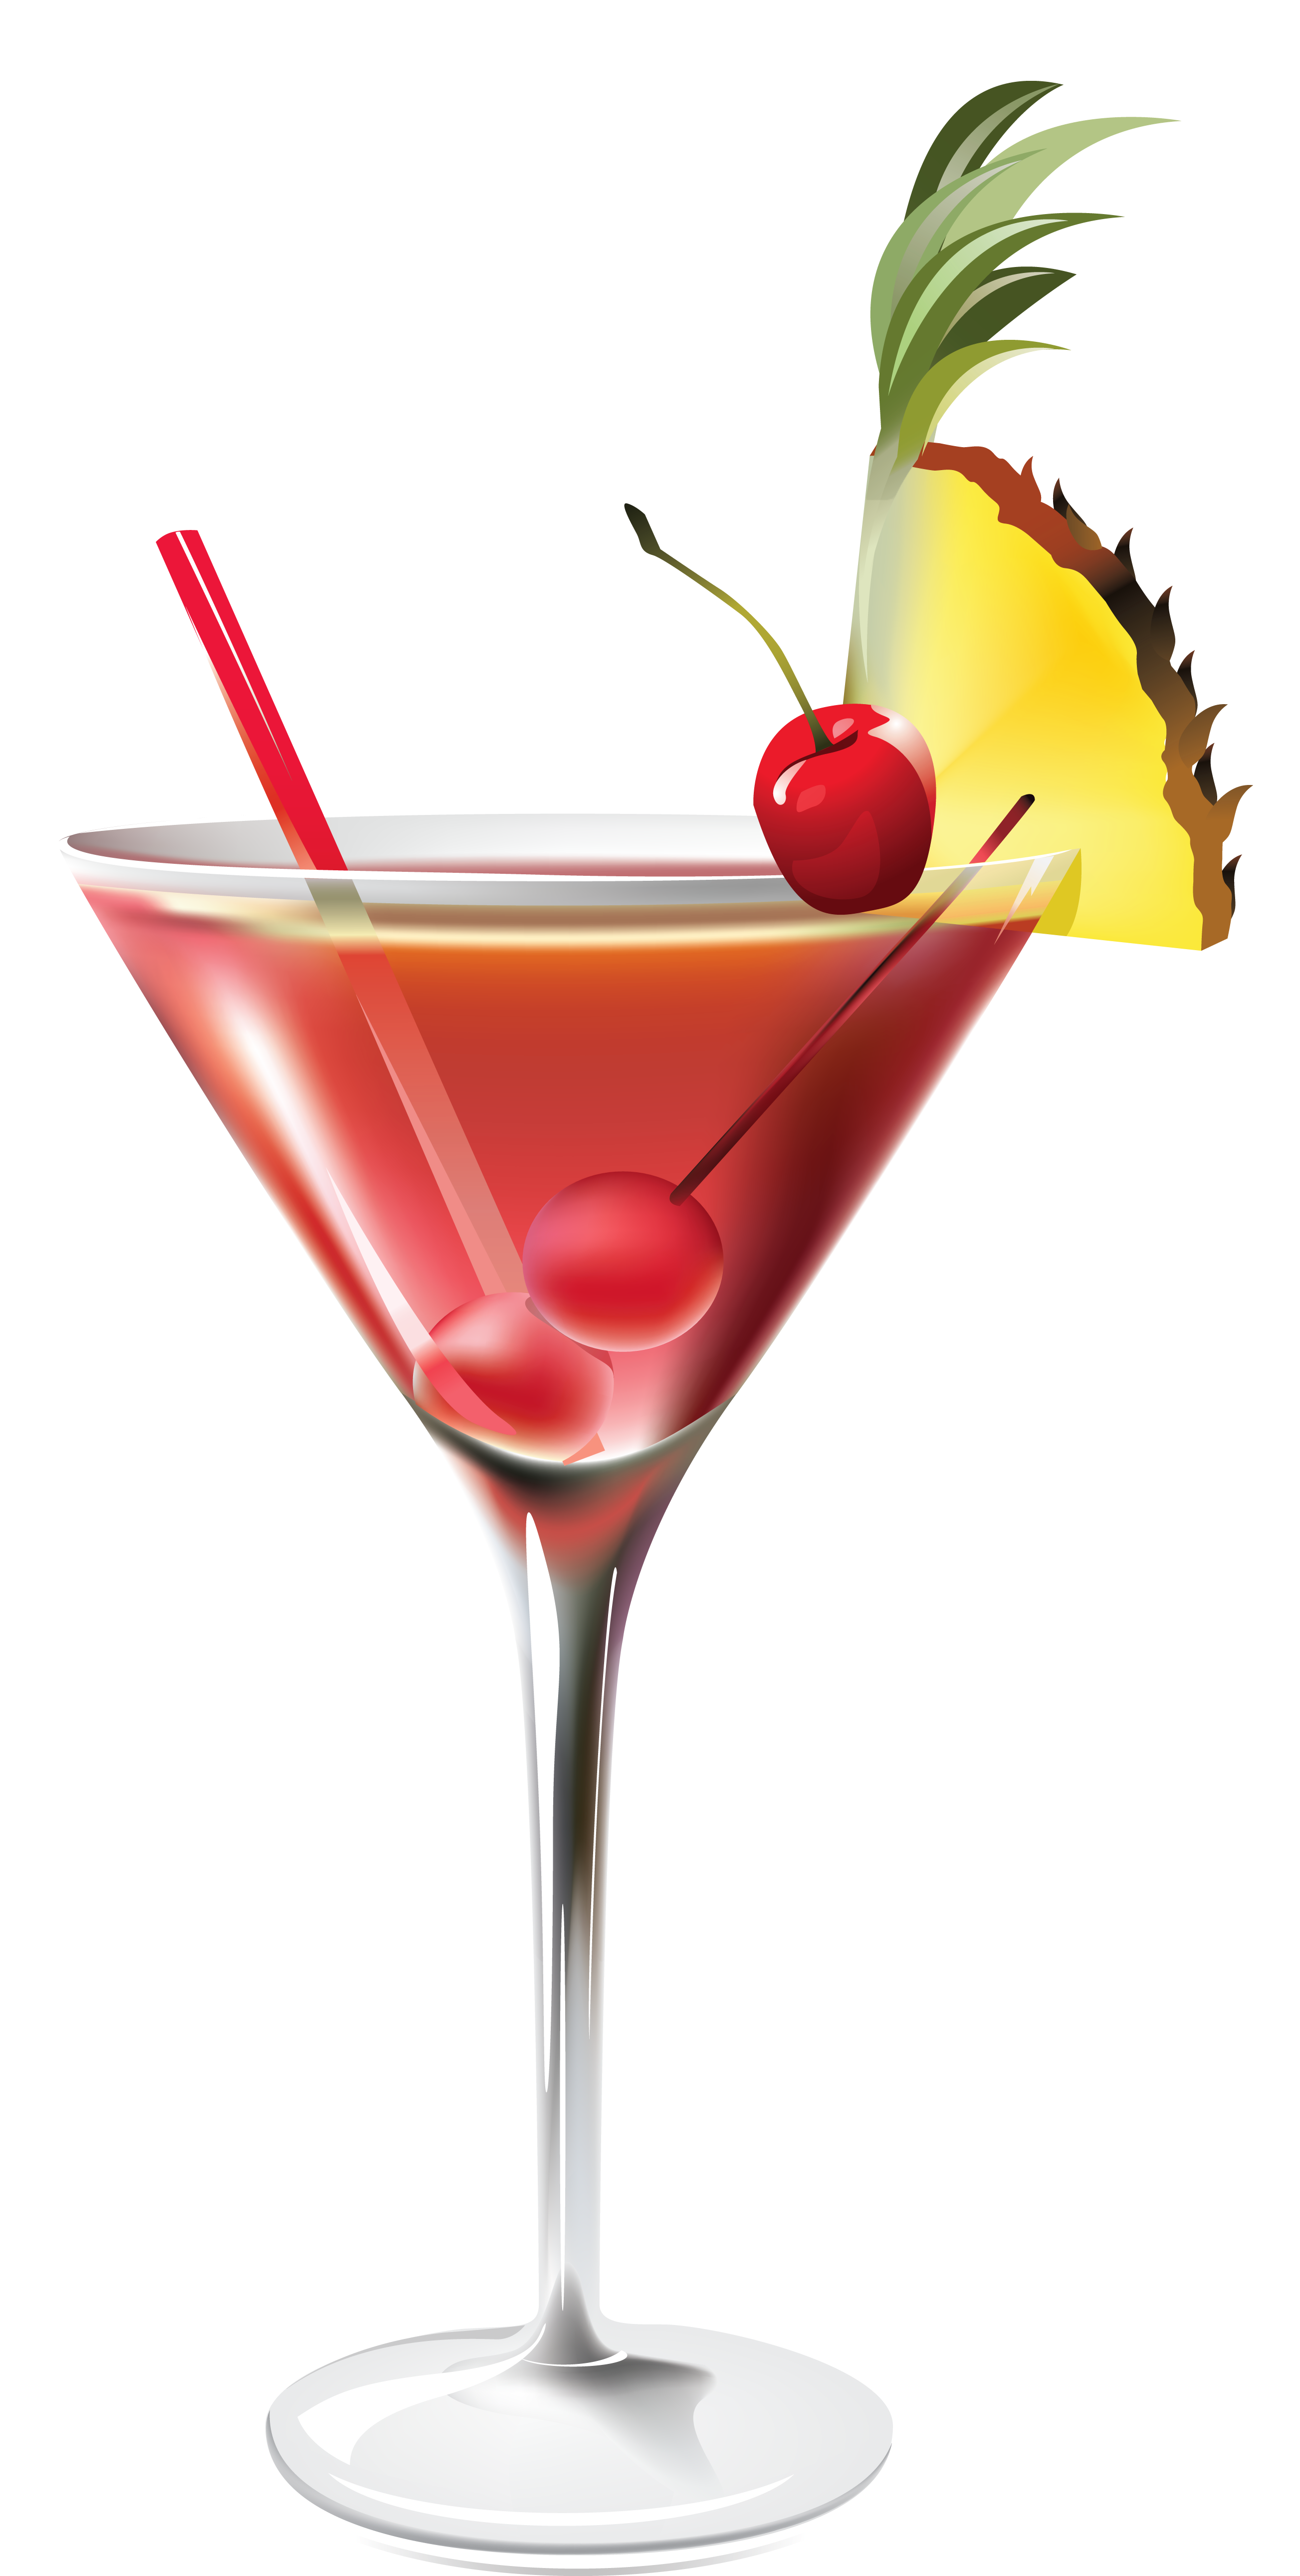 Cocktail Png HD Immagine